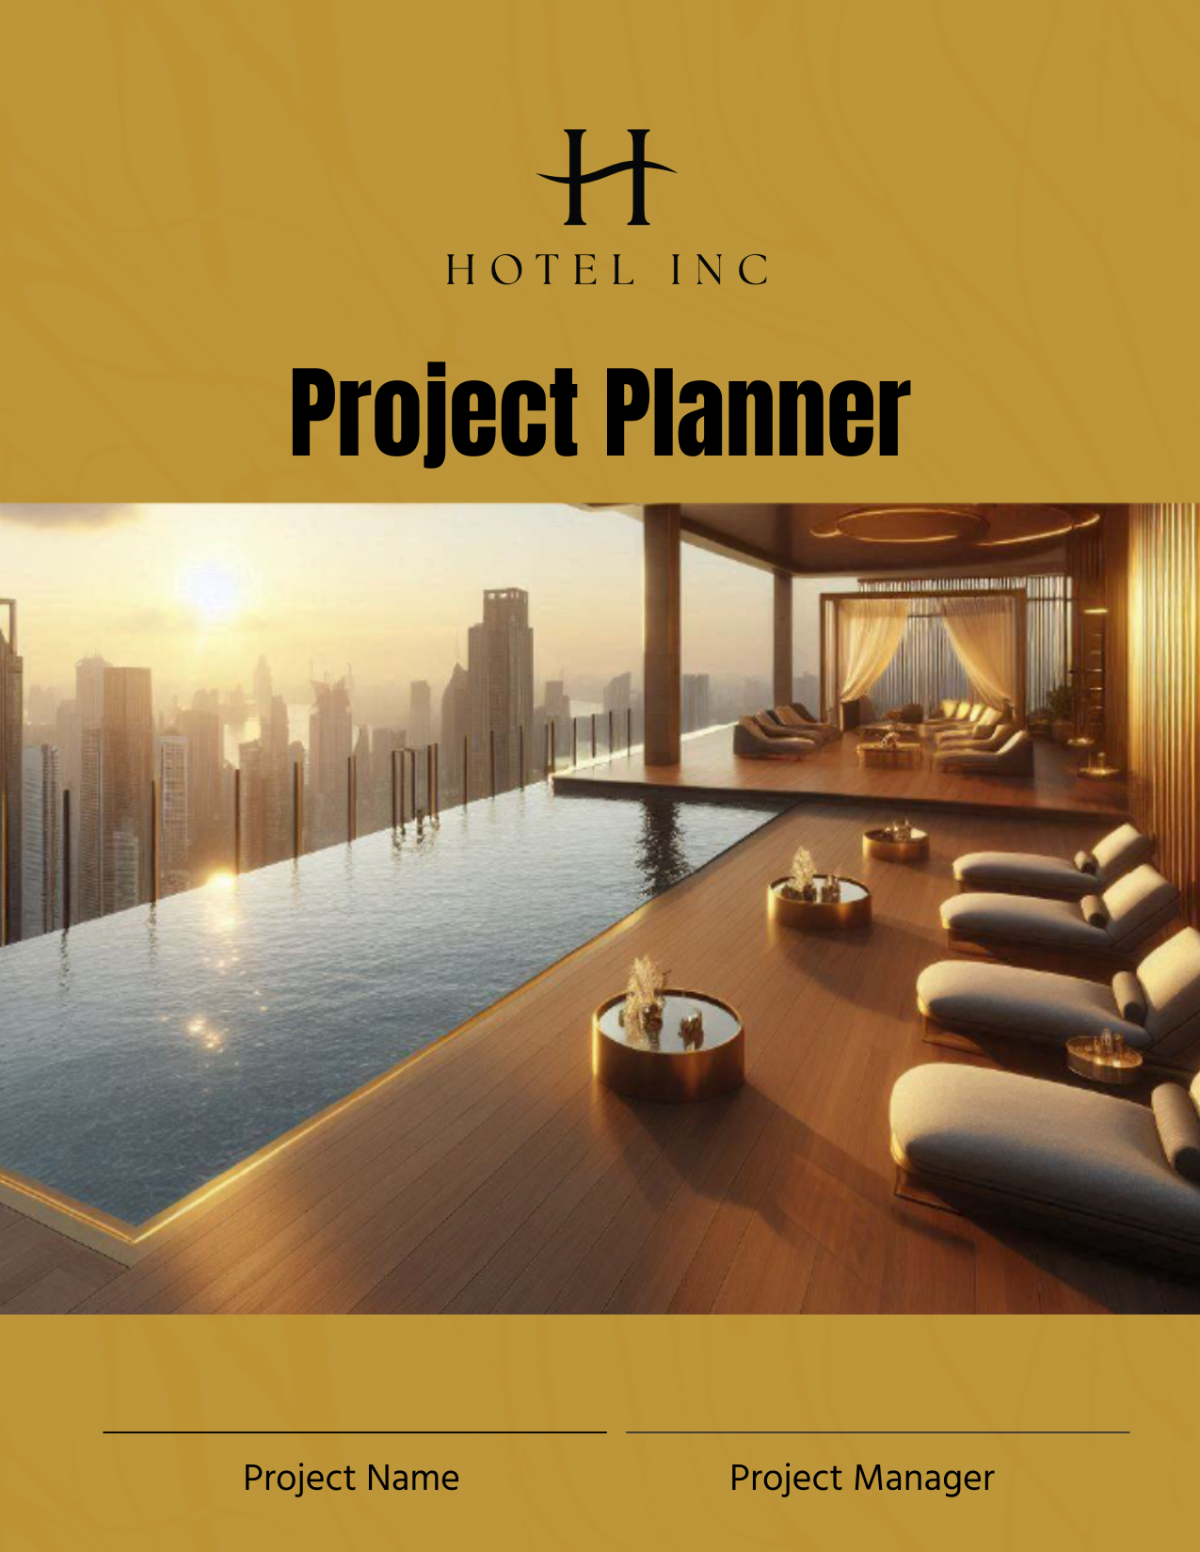 Hotel Project Planner